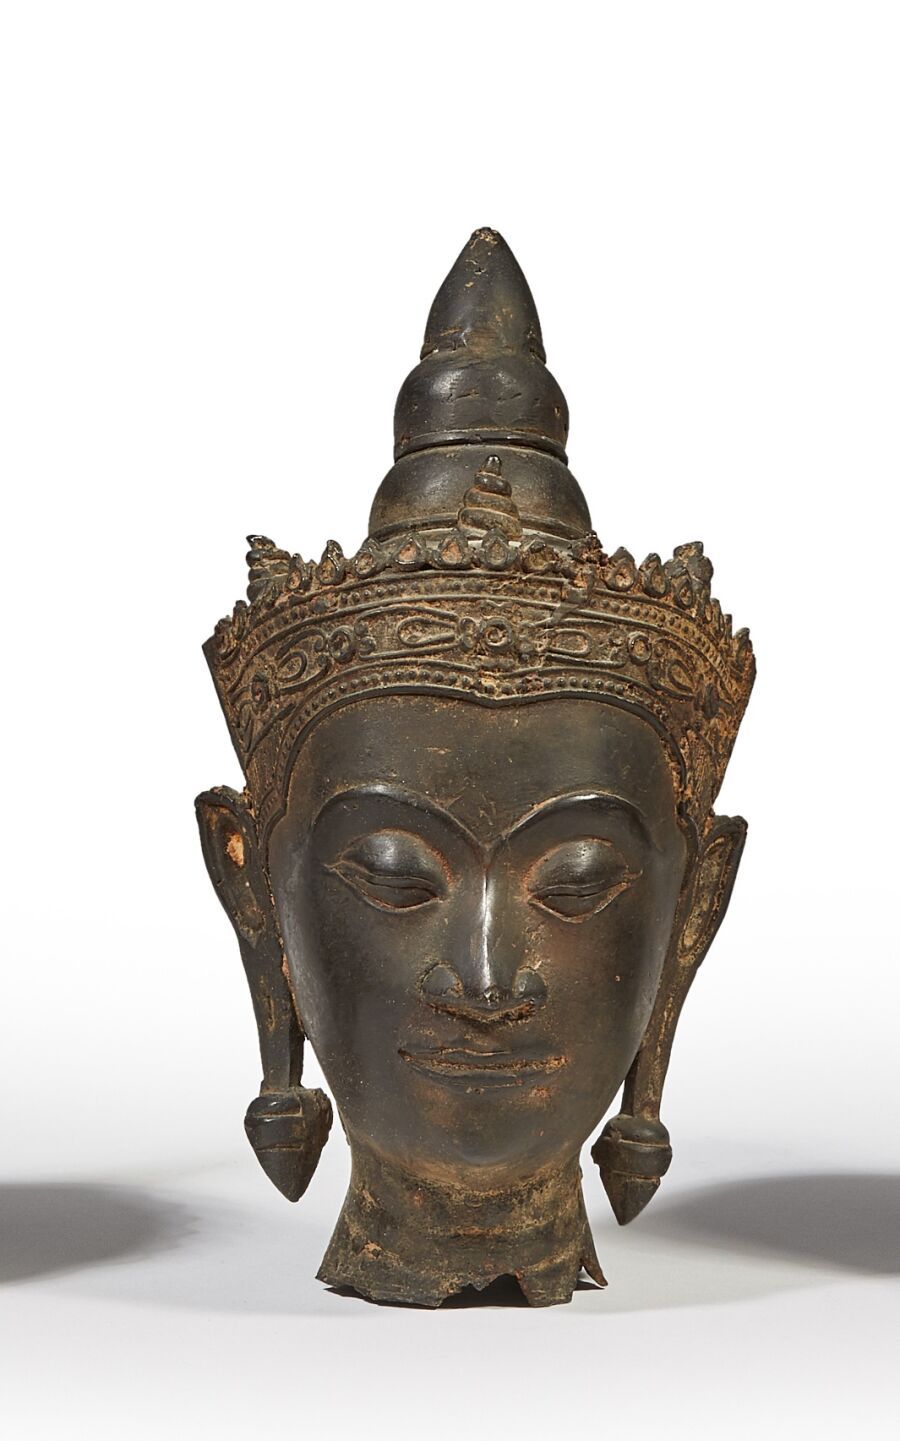 Null THAILAND - About 1900
Head of Buddha in bronze with brown patina, eyes half&hellip;